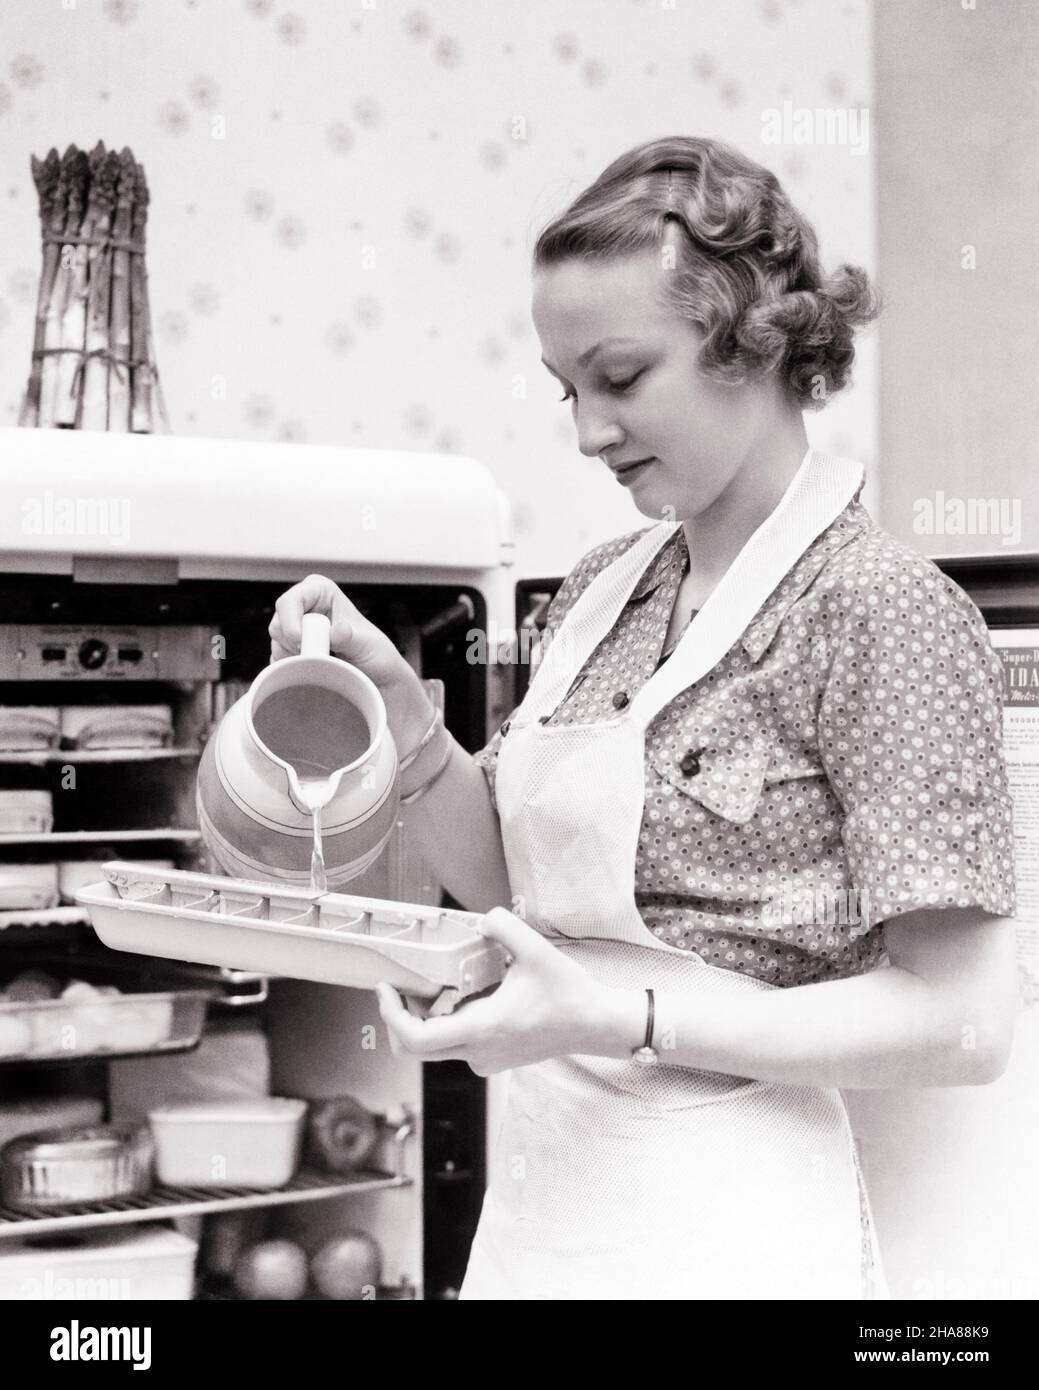 1930s SMILING YOUNG HOUSEWIFE WEARING APRON POURING WATER INTO ALUMINUM ICE CUBE TRAY STANDING BEFORE OPEN REFRIGERATOR - h6011 HAR001 HARS SATISFACTION CHORES FEMALES STUDIO SHOT HOME LIFE LUXURY COPY SPACE HALF-LENGTH LADIES PERSONS CARING CONFIDENCE EXPRESSIONS B&W HOMEMAKER CUBE PITCHER BEFORE HOMEMAKERS REFRIGERATION CHEERFUL CHORE INNOVATION HOUSEWIVES SMILES TASKS ICE CUBES JOYFUL STYLISH ALUMINUM ICEBOX COOLING TASK YOUNG ADULT WOMAN BLACK AND WHITE CAUCASIAN ETHNICITY HAR001 OLD FASHIONED Stock Photo